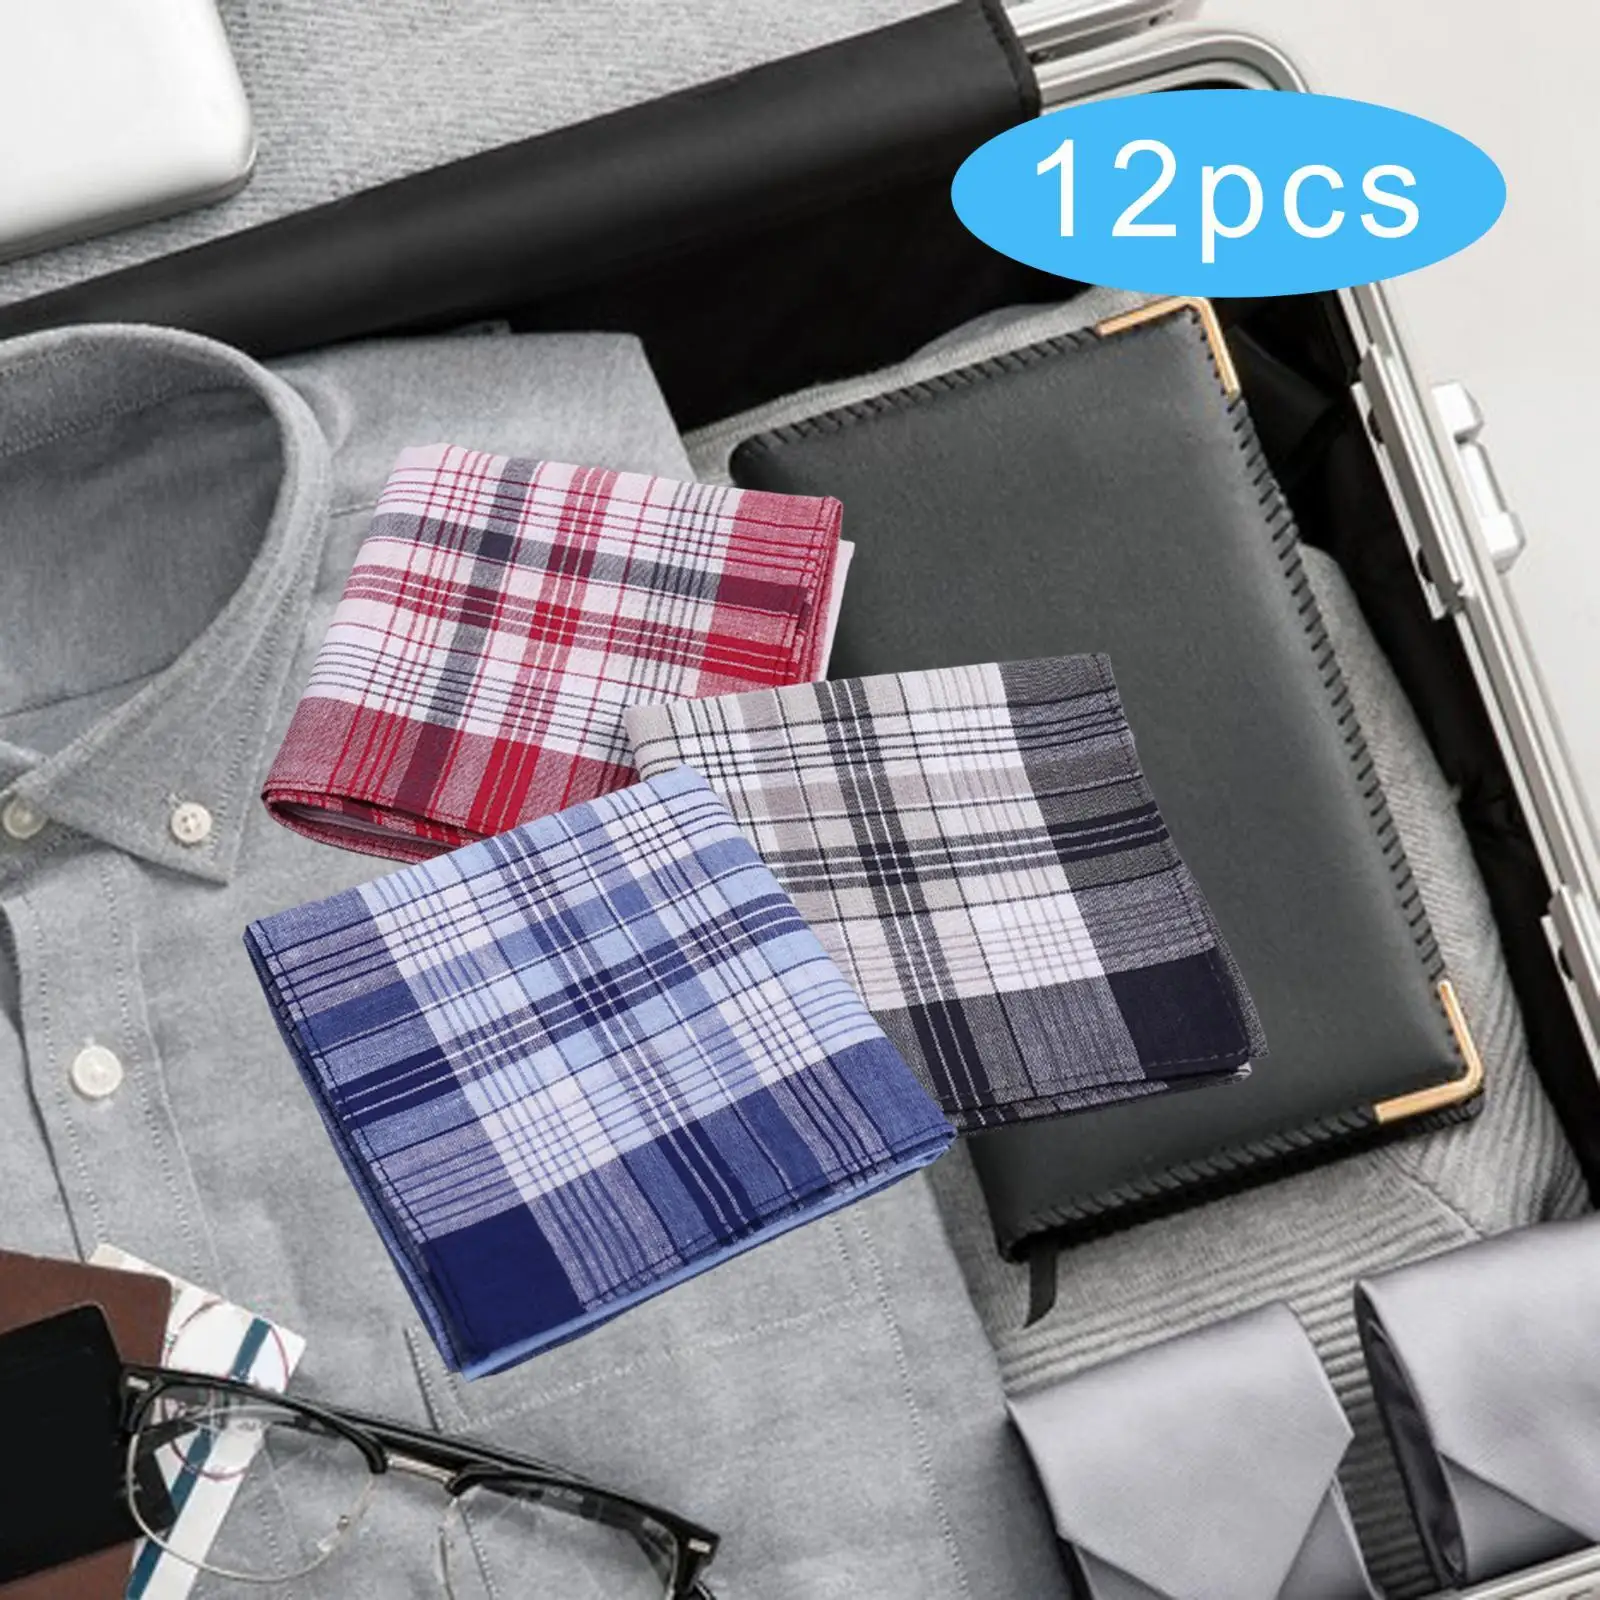 12Pcs Cotton Men`s Handkerchiefs Gifts 40x40cm Wipe The Sweat Towels Kerchief Hanky for Grooms Casual Grandfathers Suit Birthday